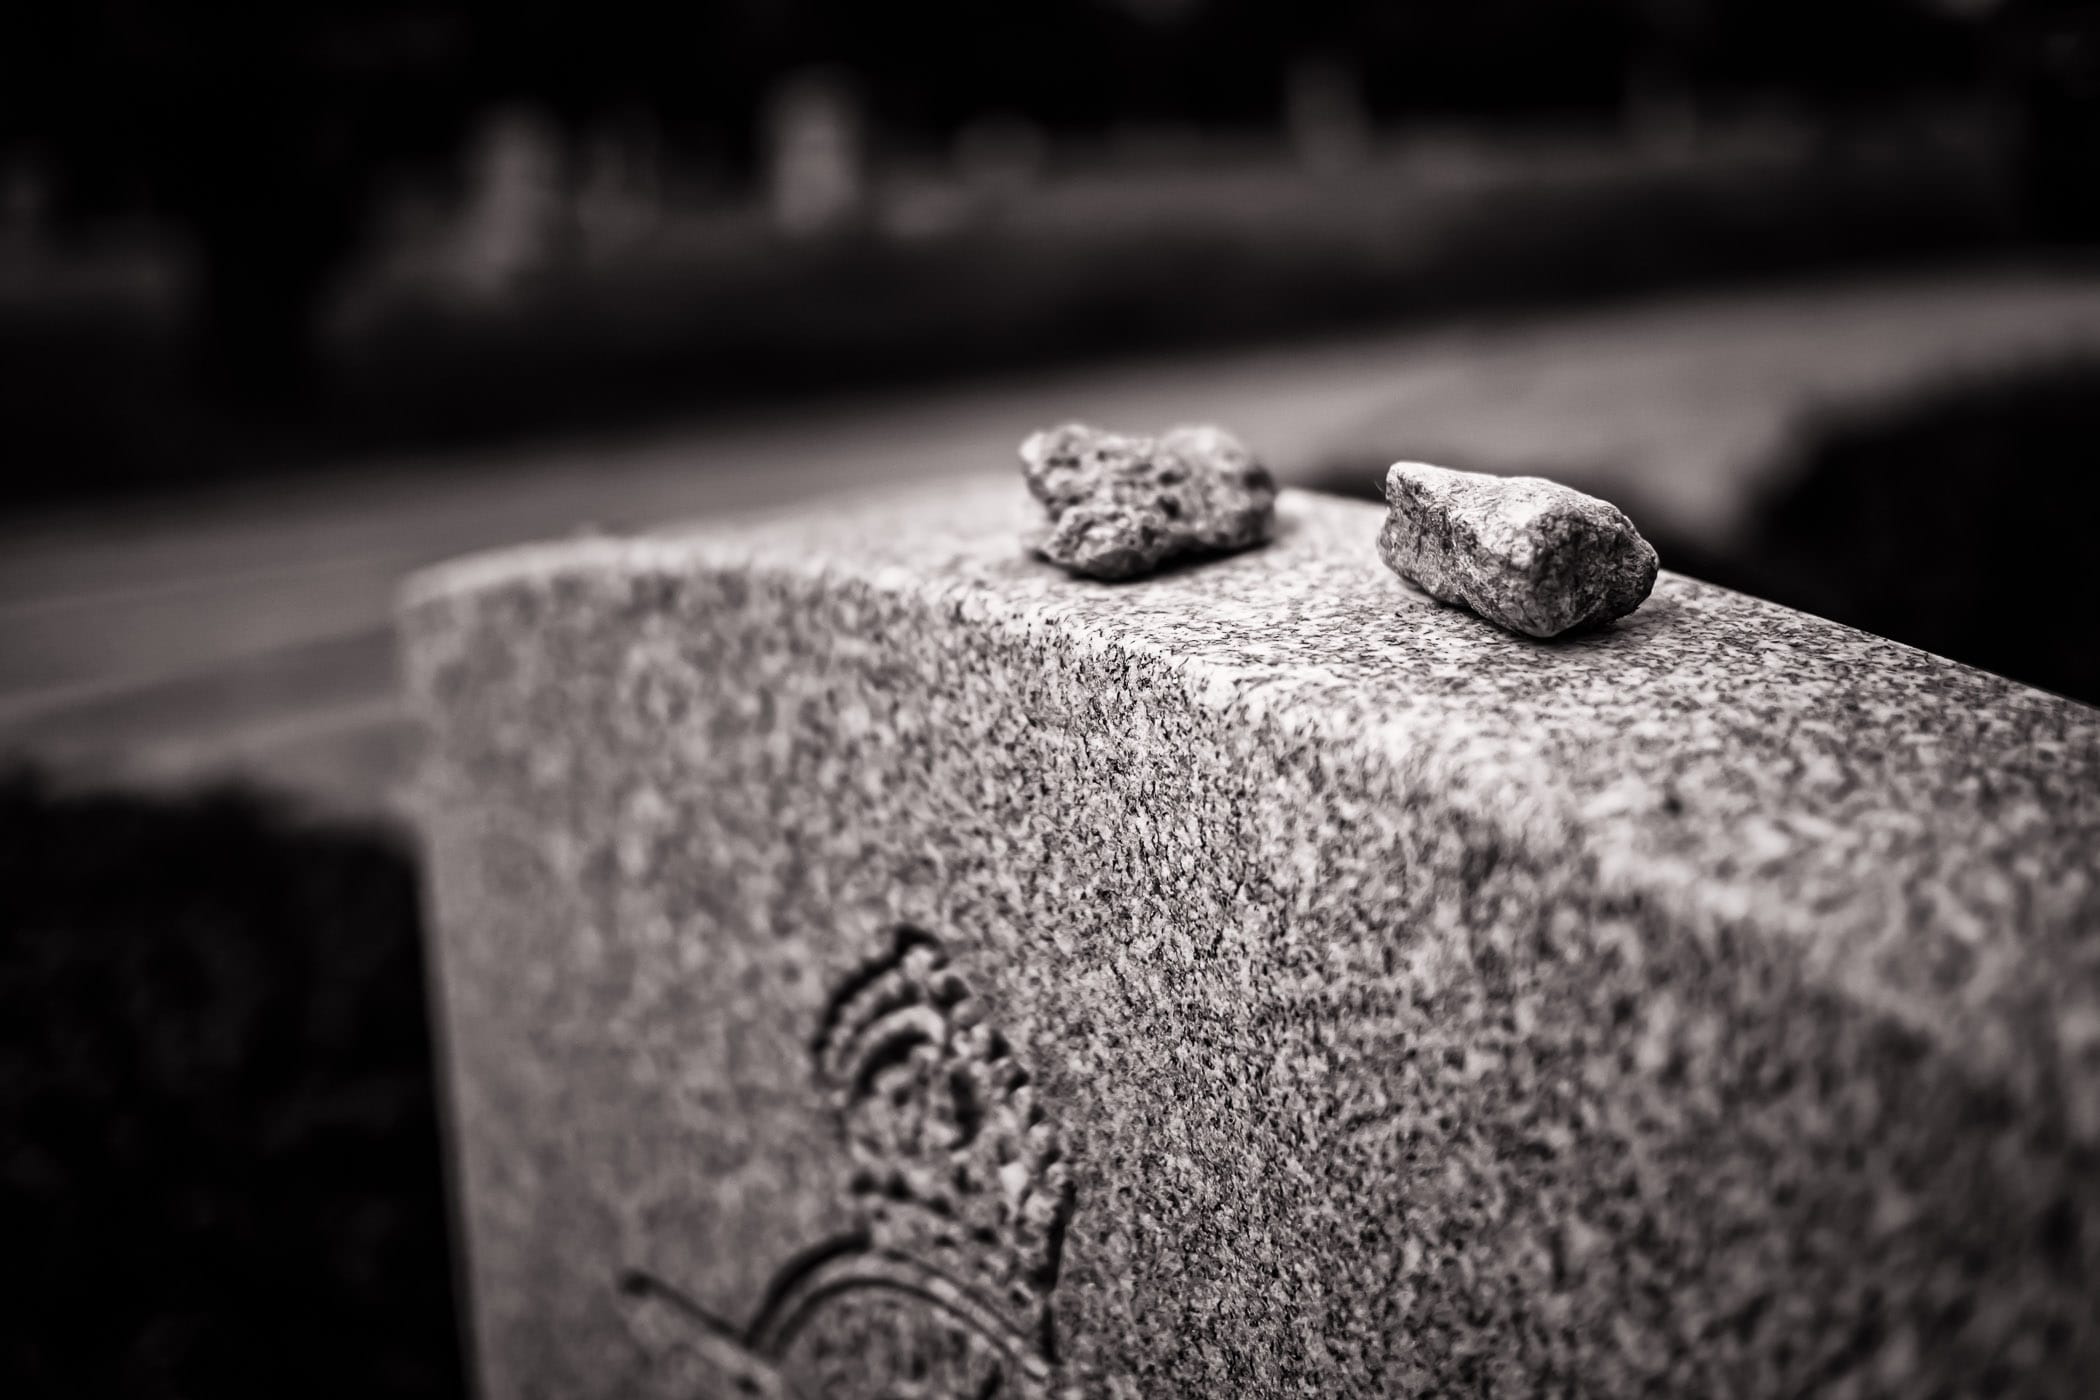 Visitation stones atop a Jewish aviator's grave at the Royal Air Force Cemetery at Oakland Memorial Park in Terrell, Texas. The RAF Cemetery holds the remains of 20 aviators who died while training at the nearby No. 1 British Flying Training School during World War II.